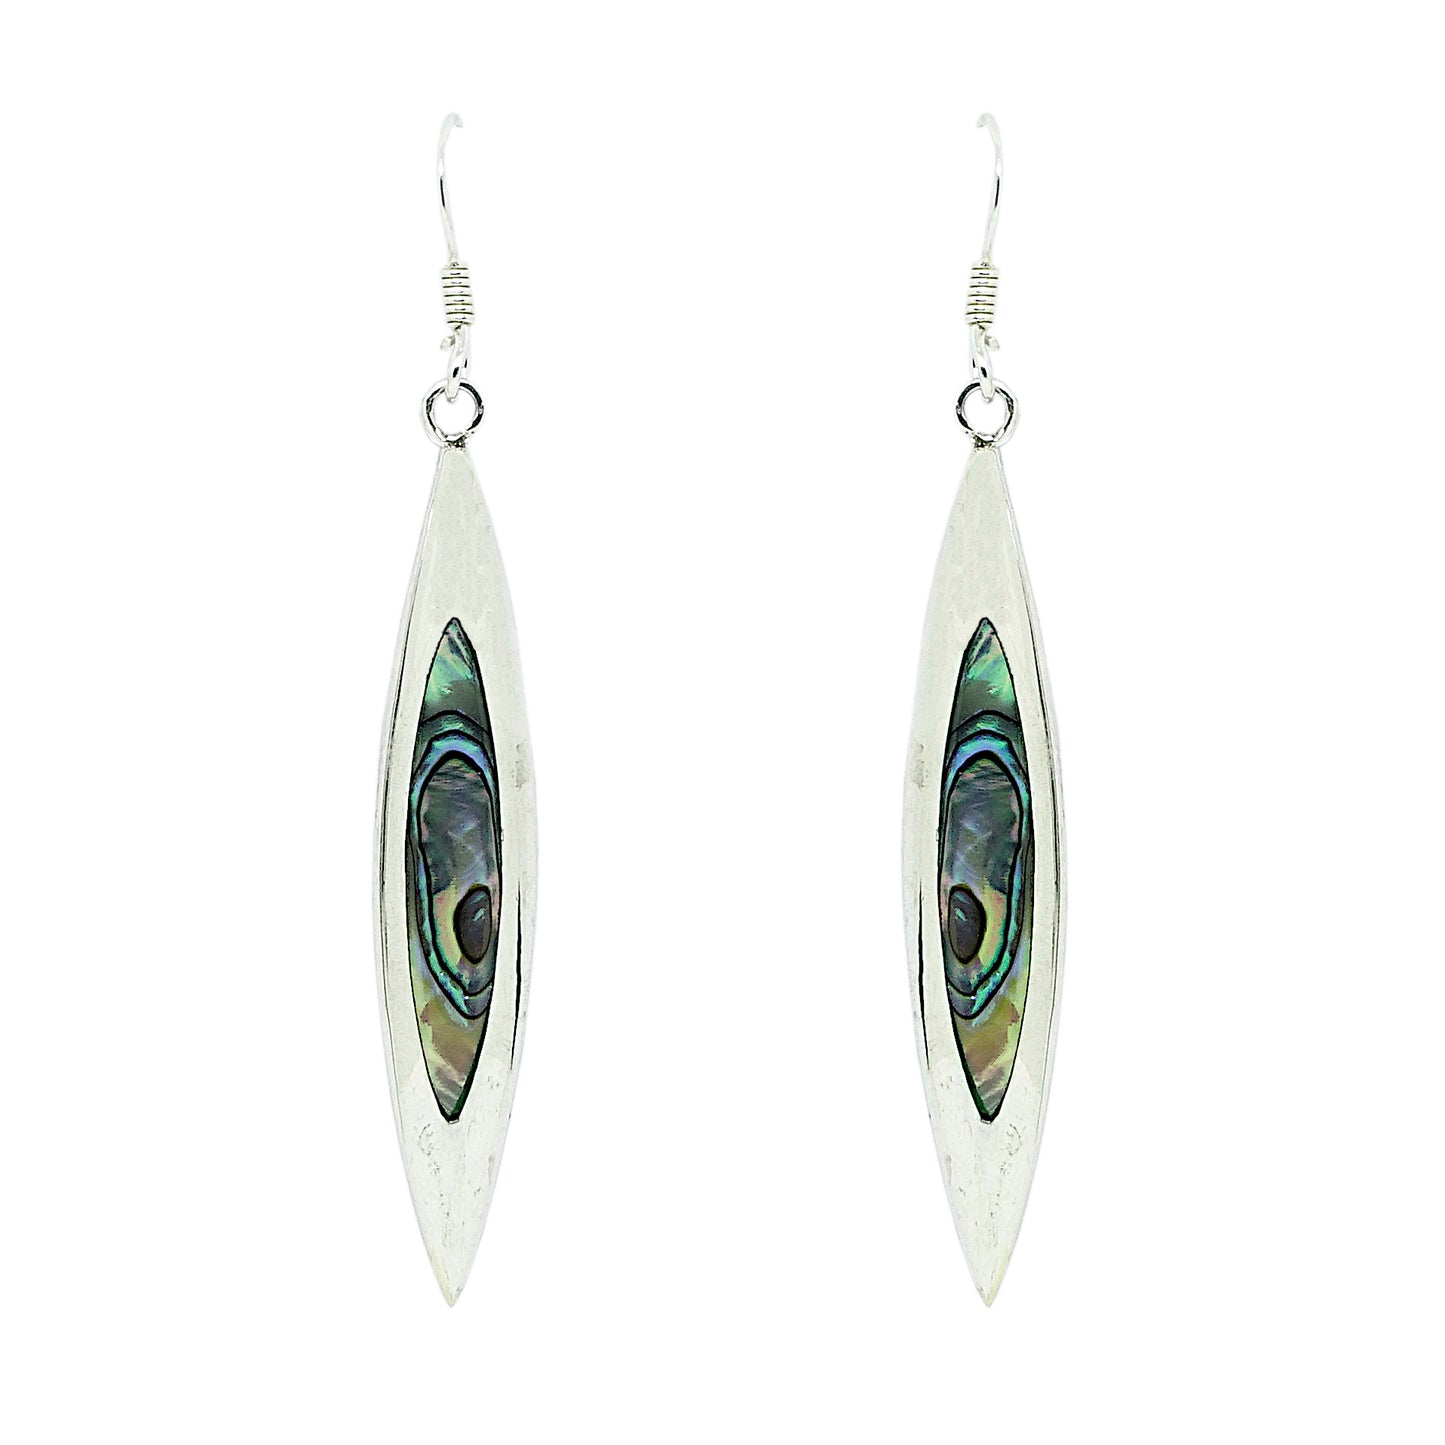 Abalone Shell Sterling Silver Earrings with Hook Backs